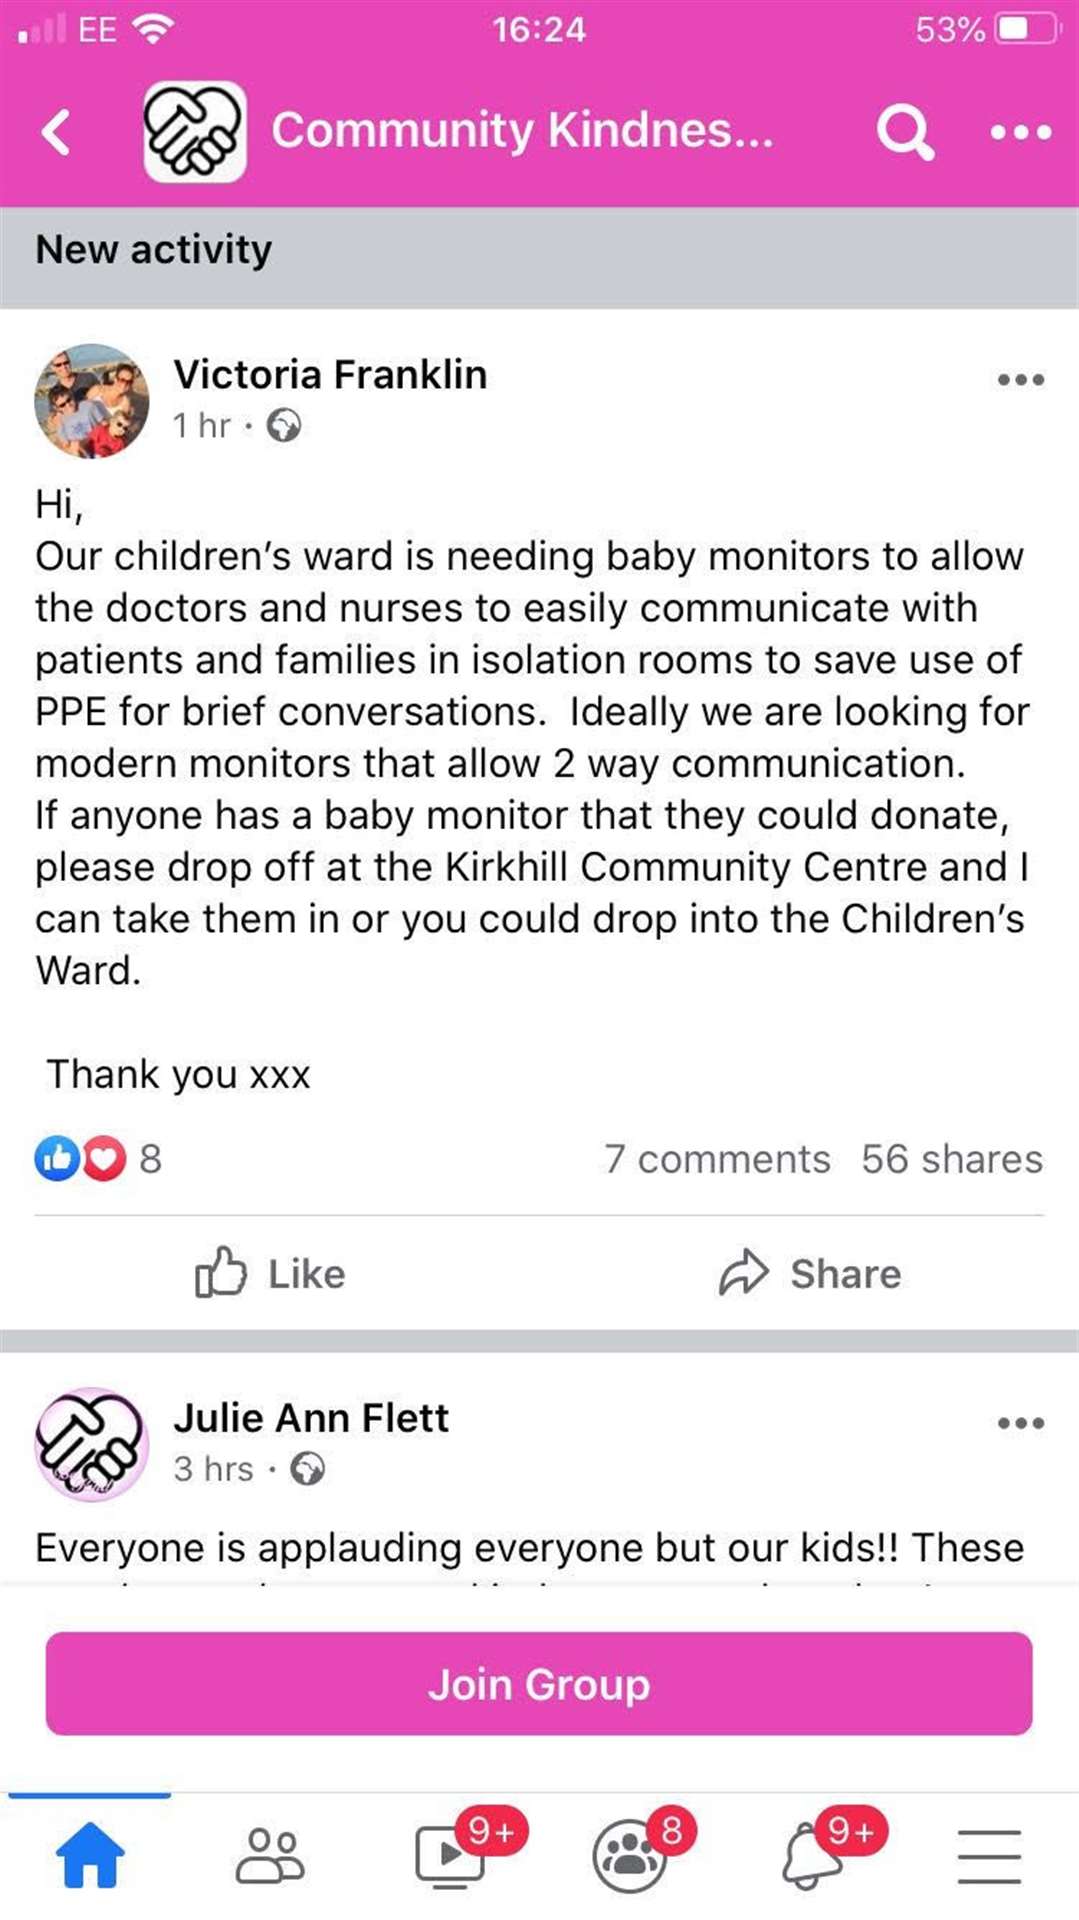 The Facebook appeal for baby monitors.